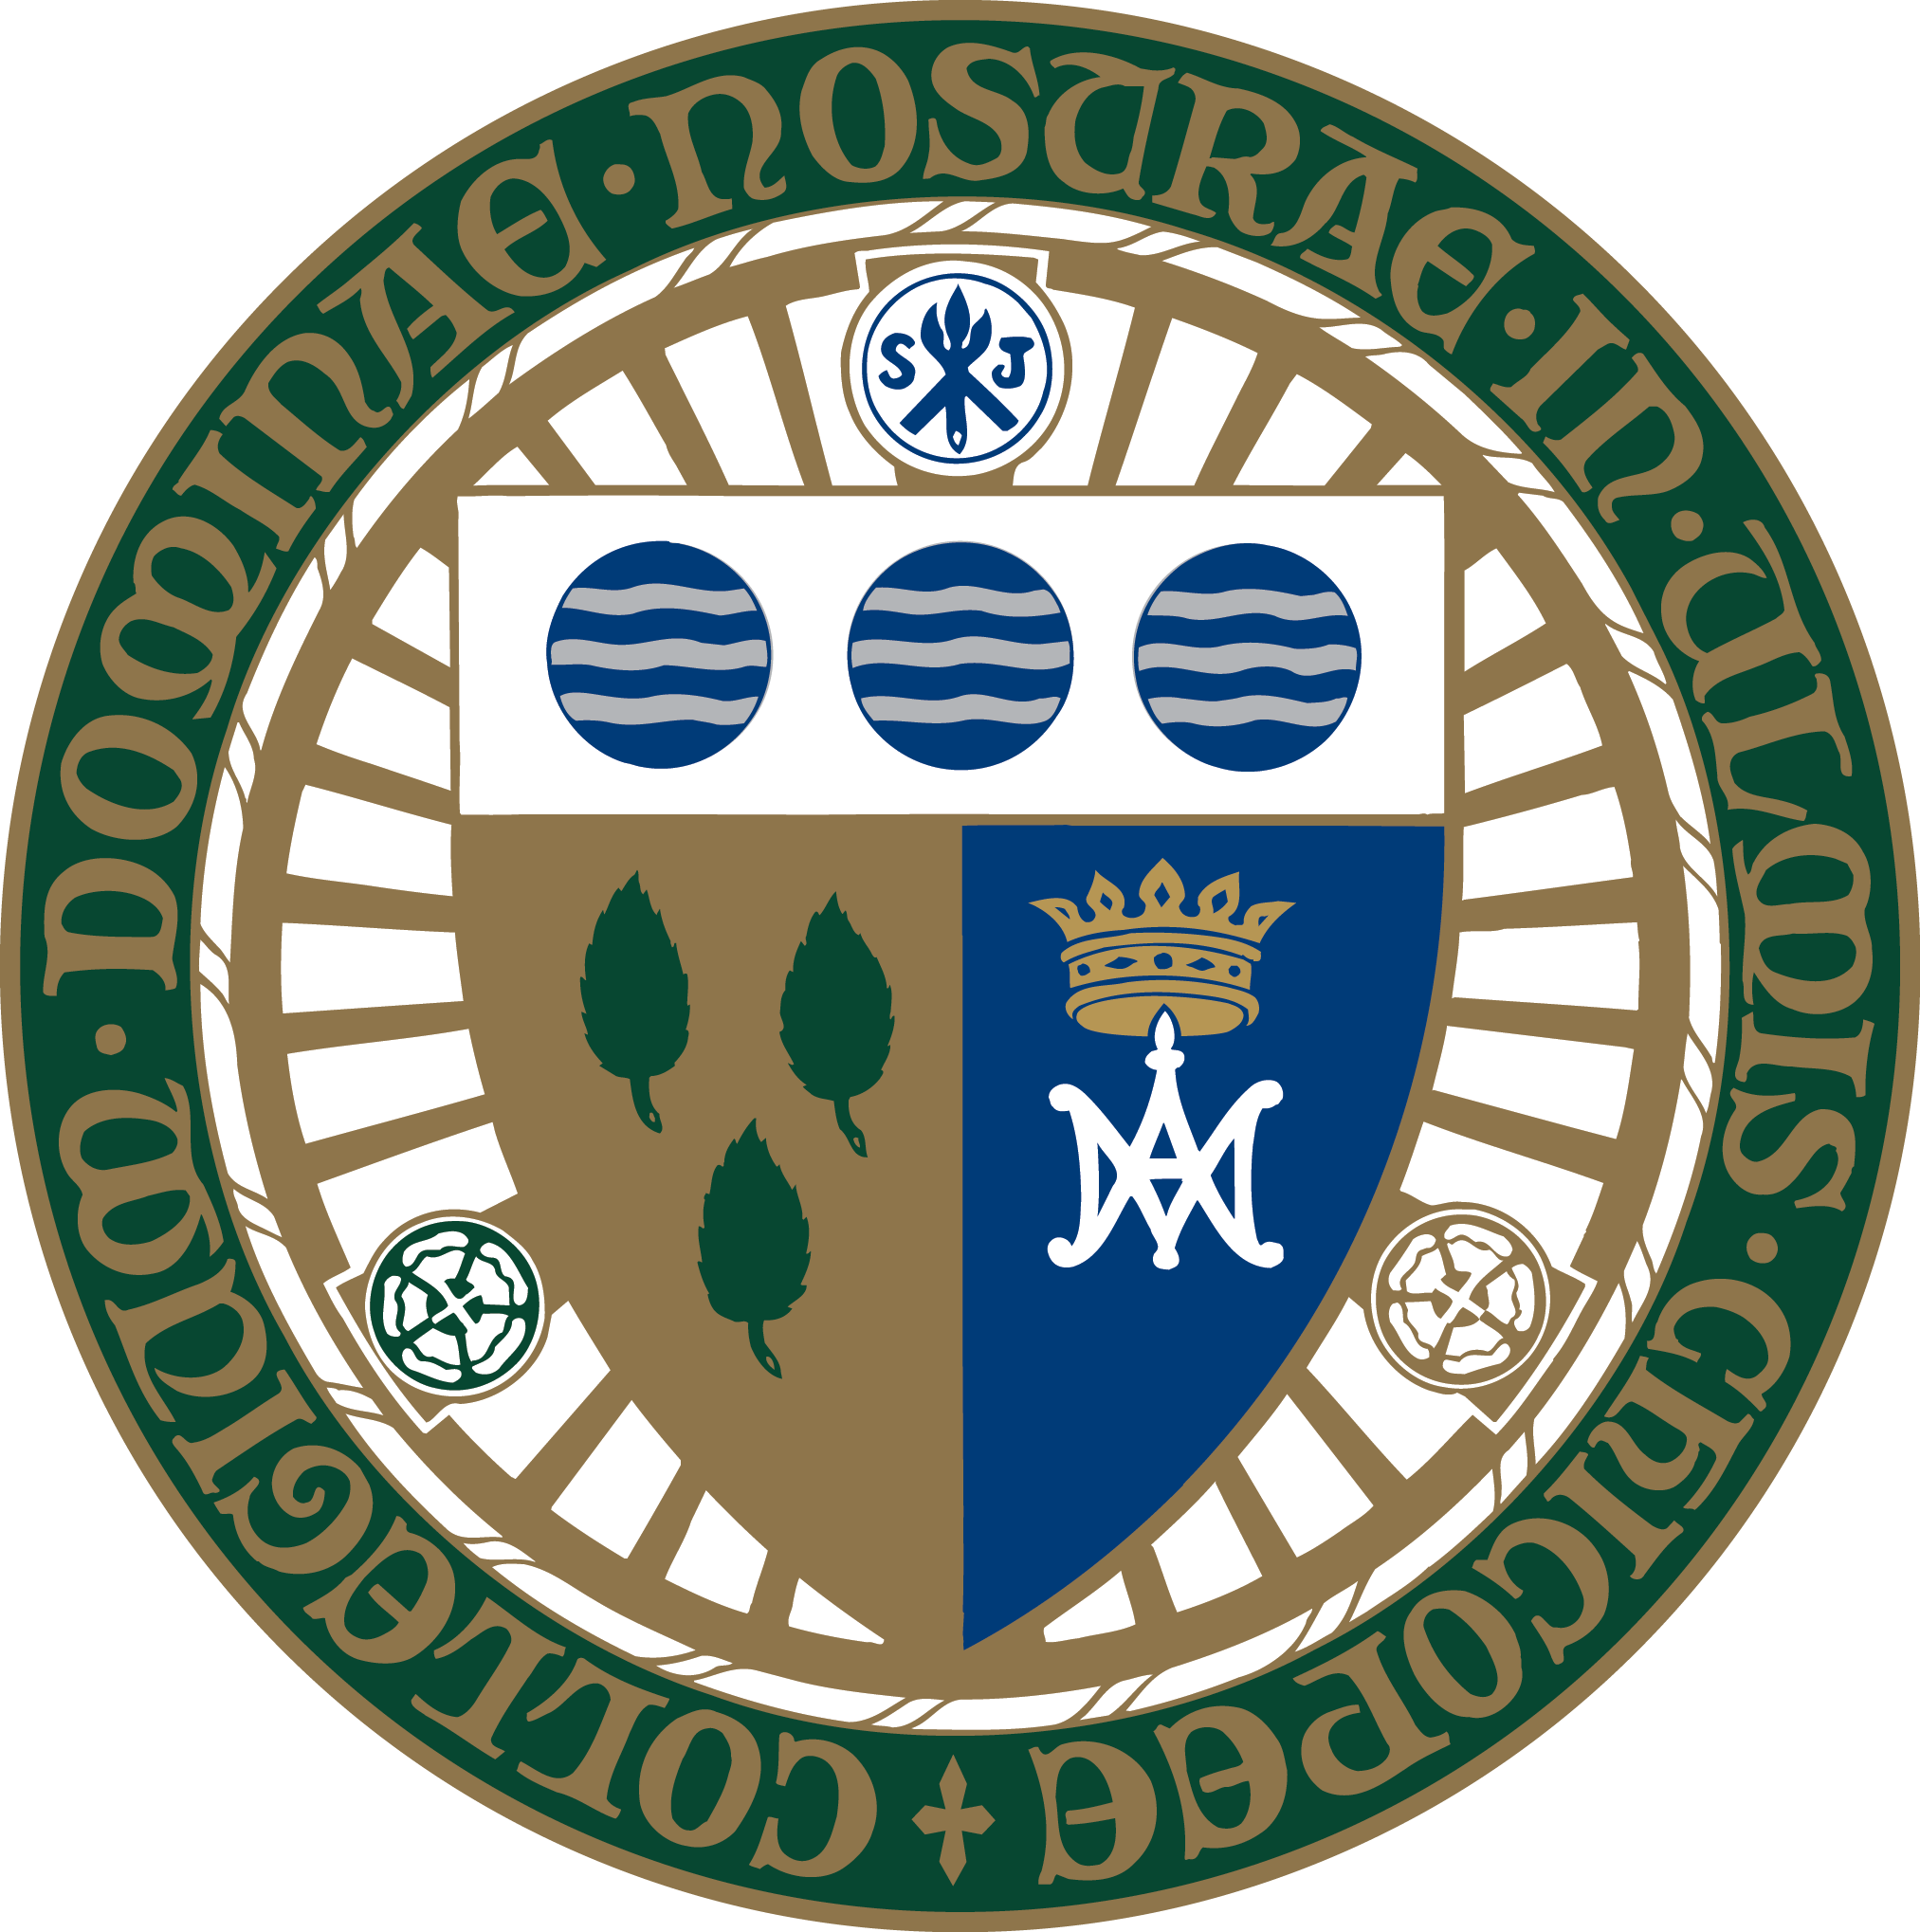 Image of the Elms College standard seal